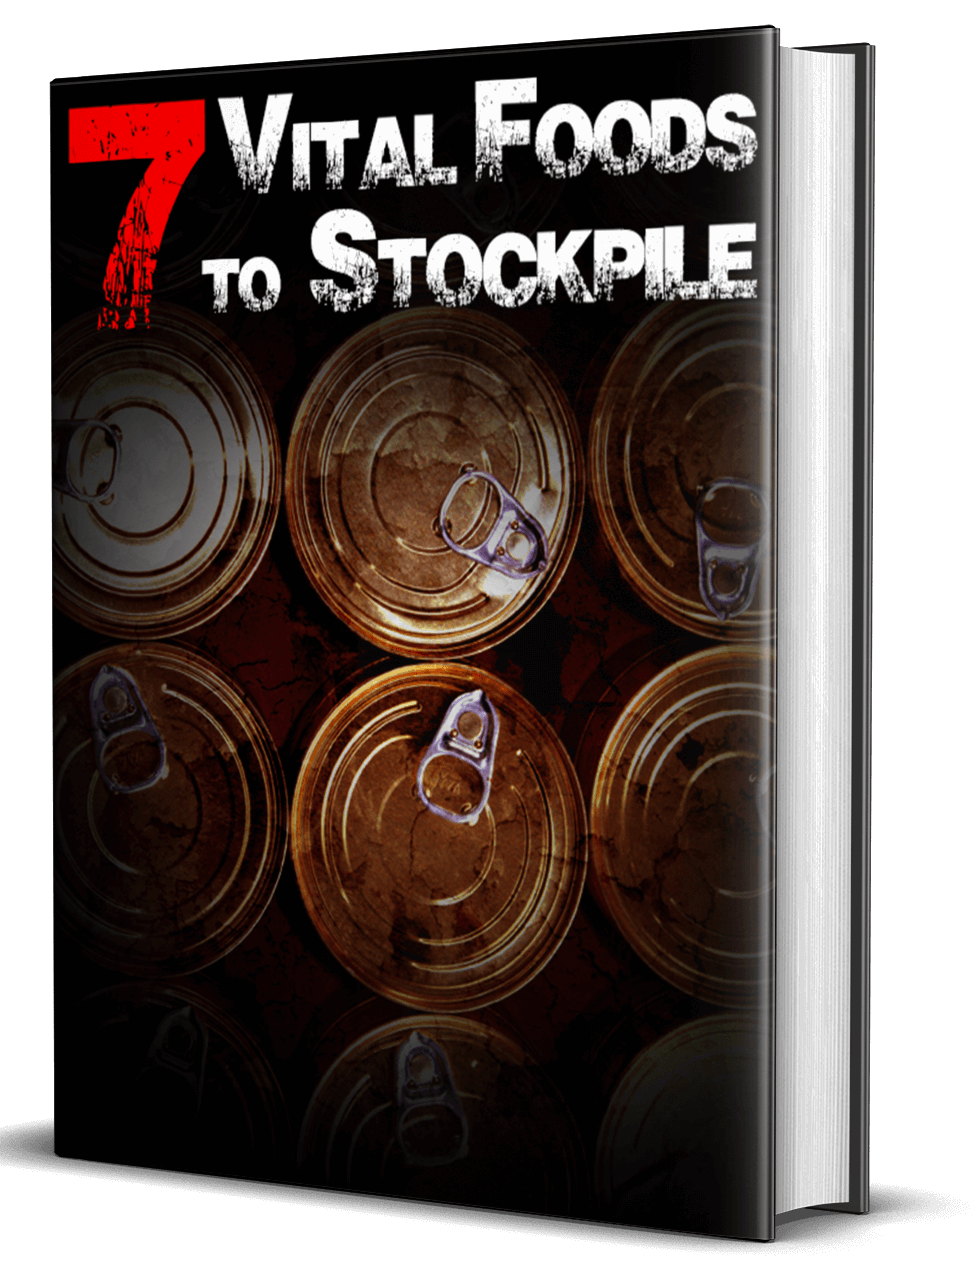 Seven foods to stockpile